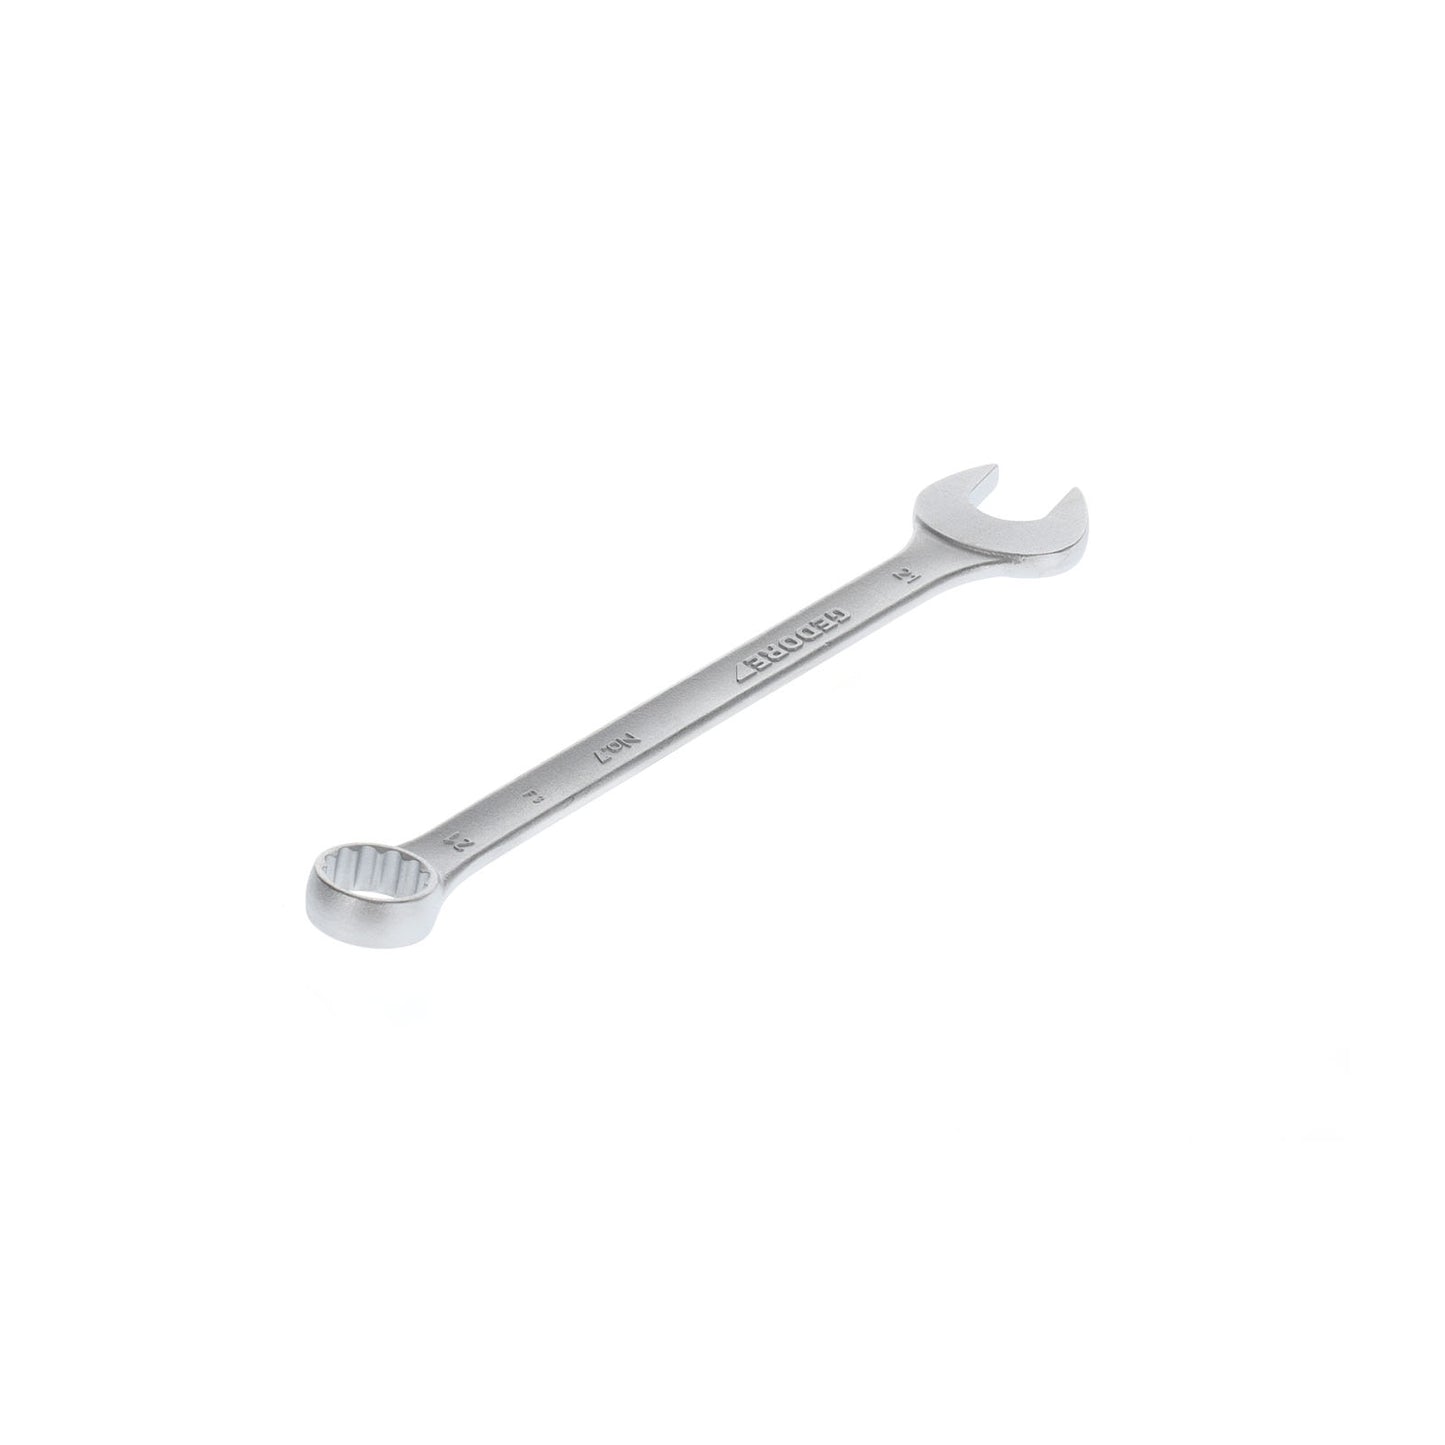 GEDORE 7 21 - Combination Wrench, 21 mm (6092180)